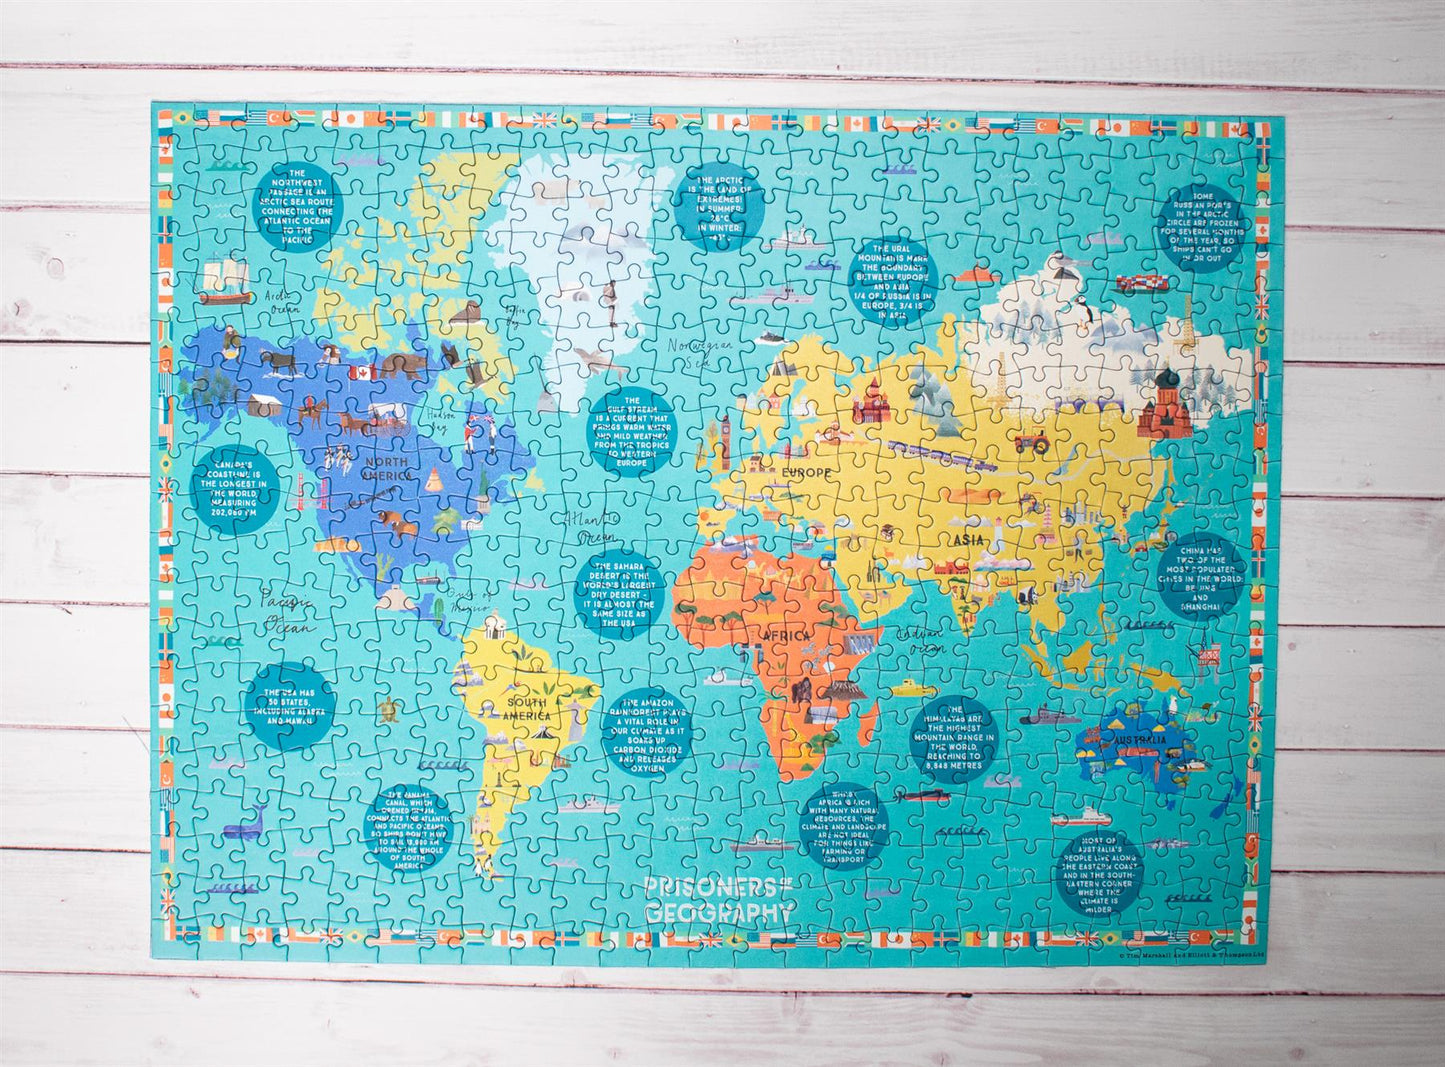 Prisoners of Geography World Map 500 Piece Jigsaw Puzzle